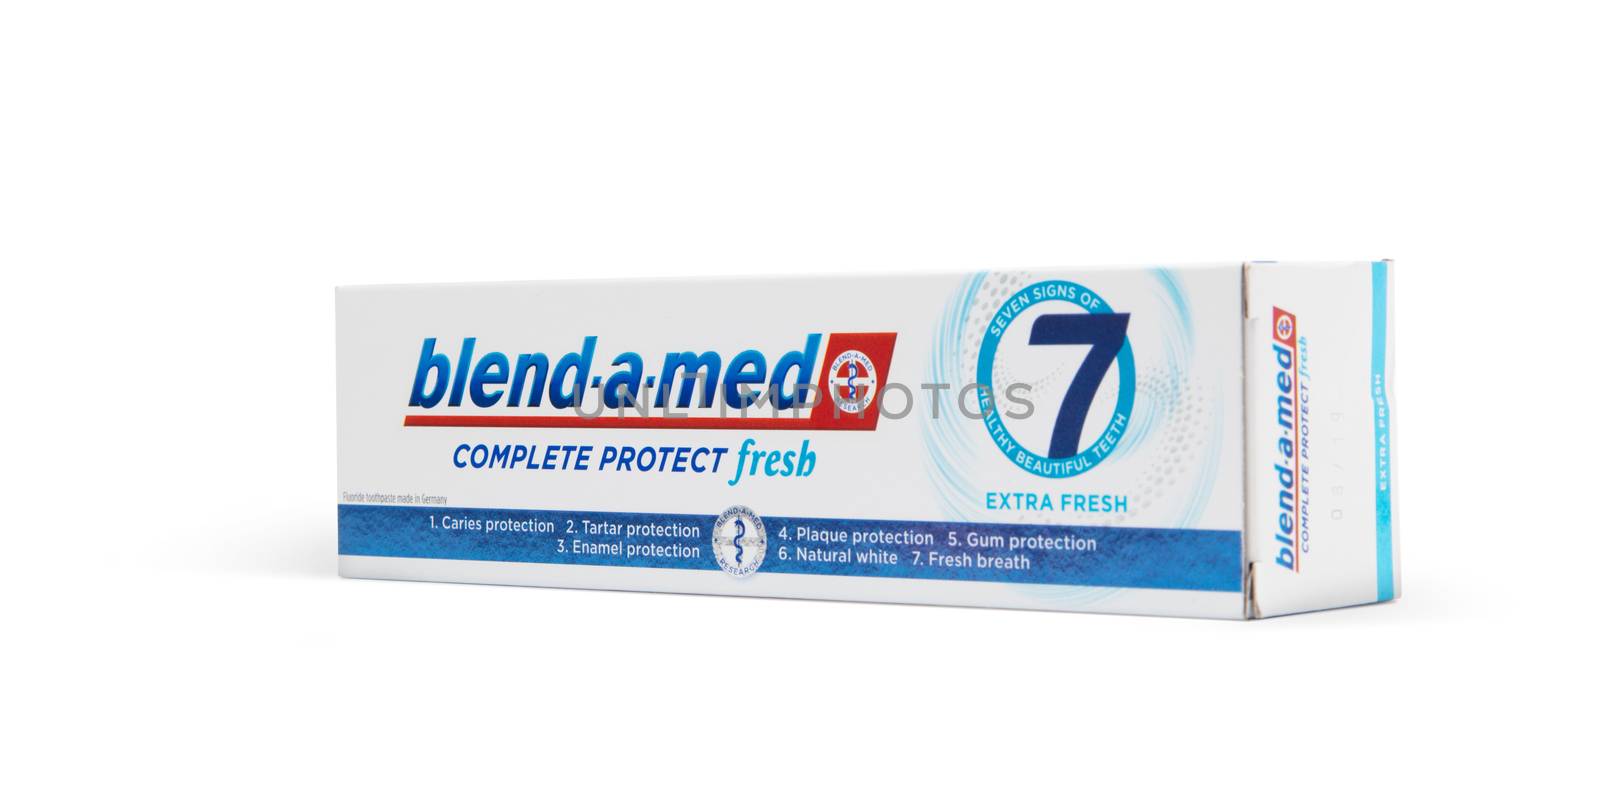 Blend-A-Med toothpaste,  Extra Fresh,  made by Procter & Gamble. by SlayCer